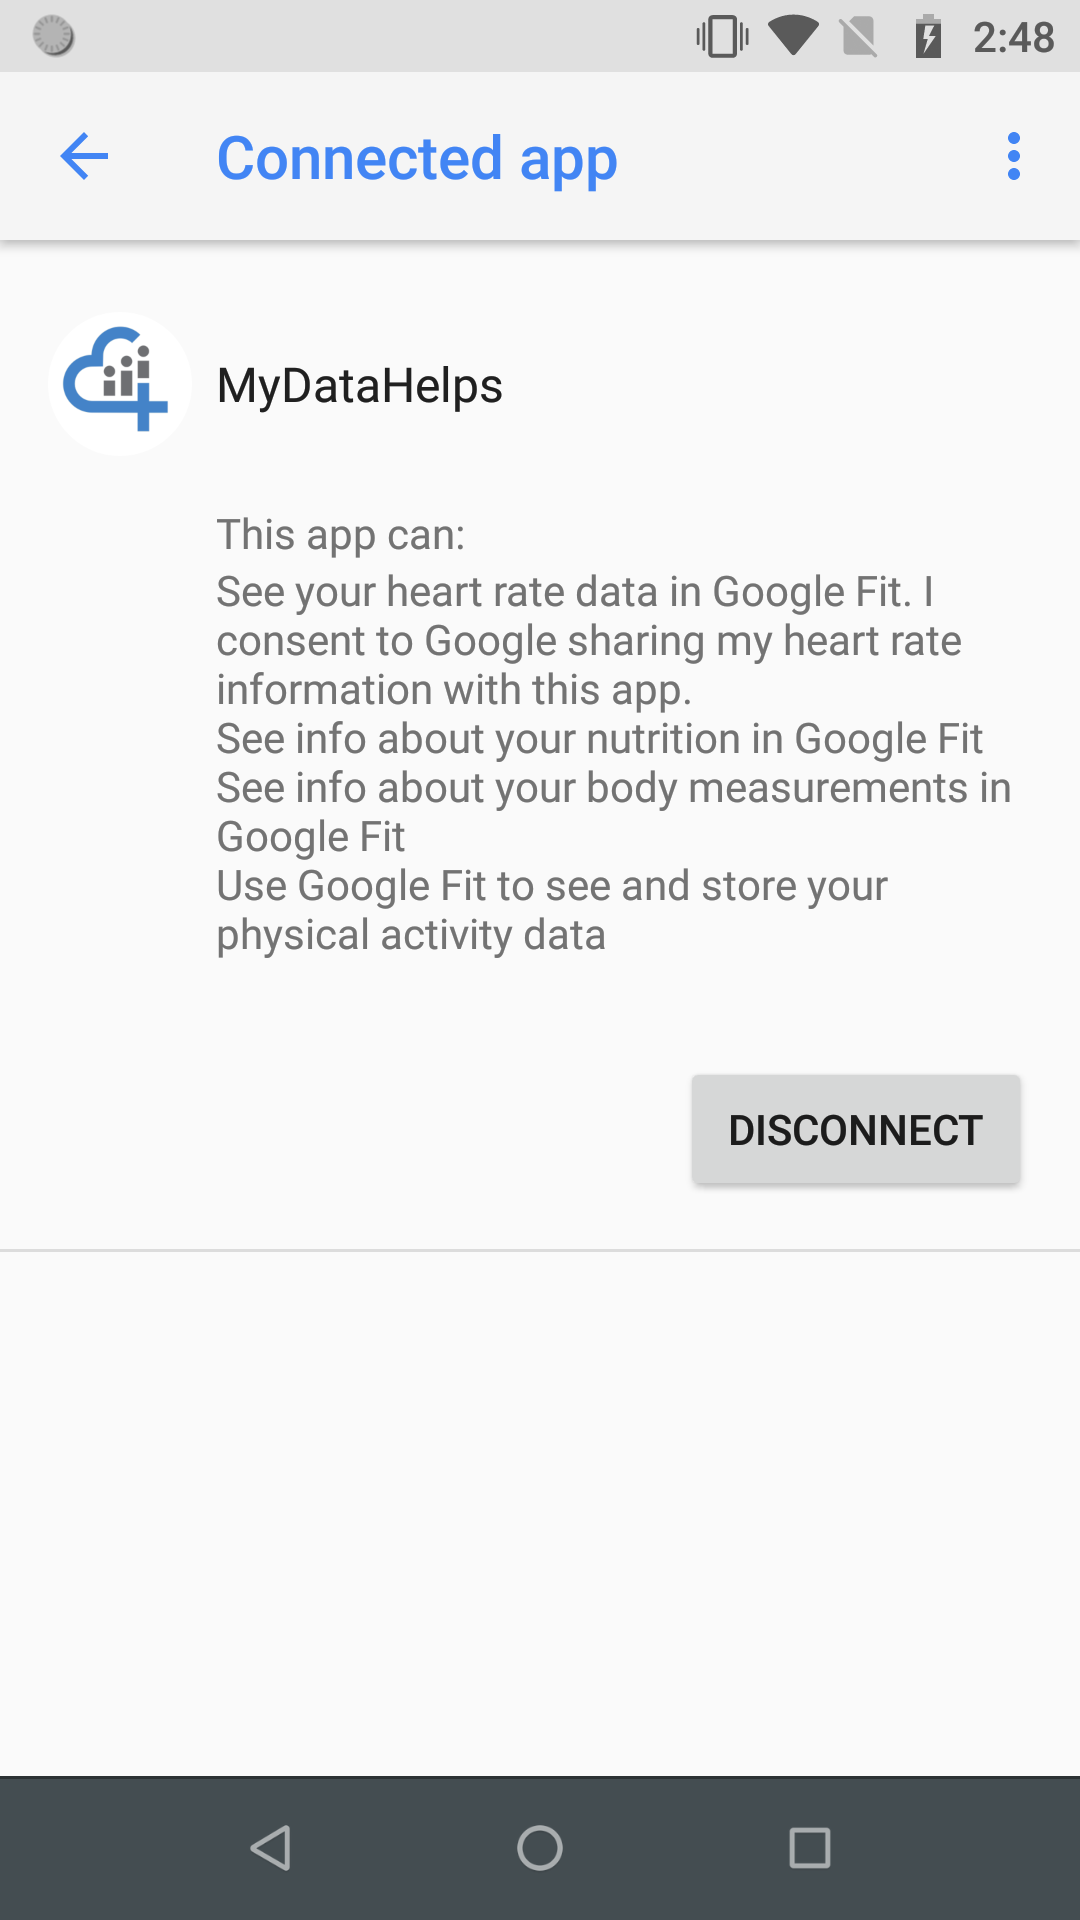 Google_Fit_Connected_Apps_-_MyDataHelps.png